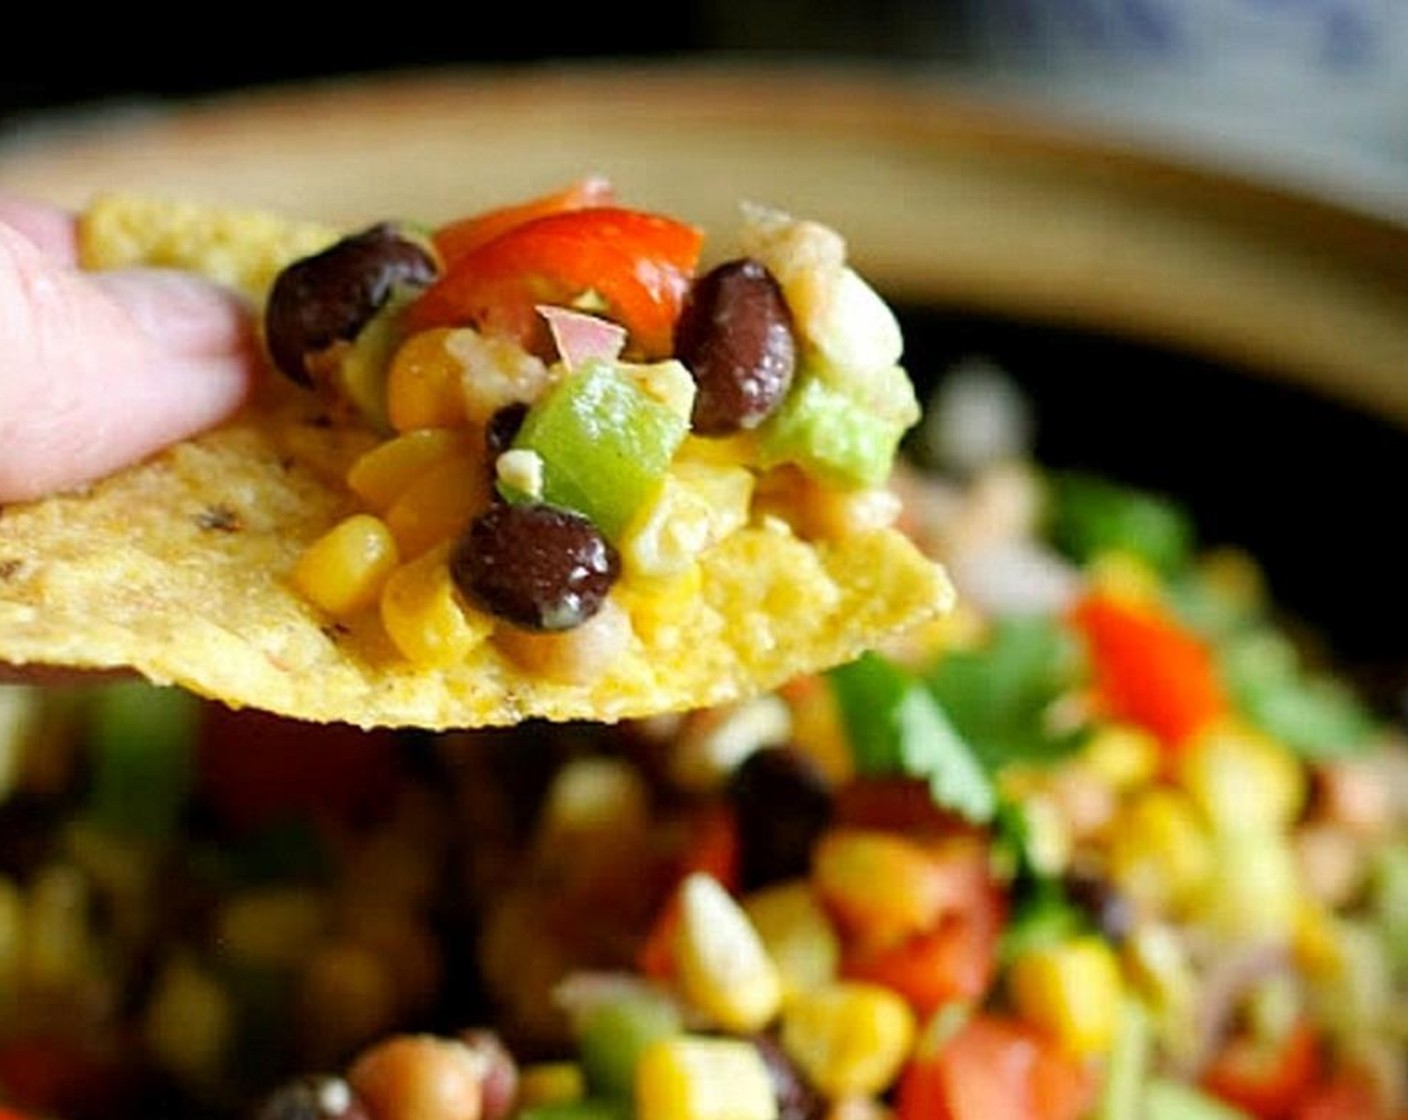 step 8 Serve with Corn Chips or as a salad or side dish. Enjoy!